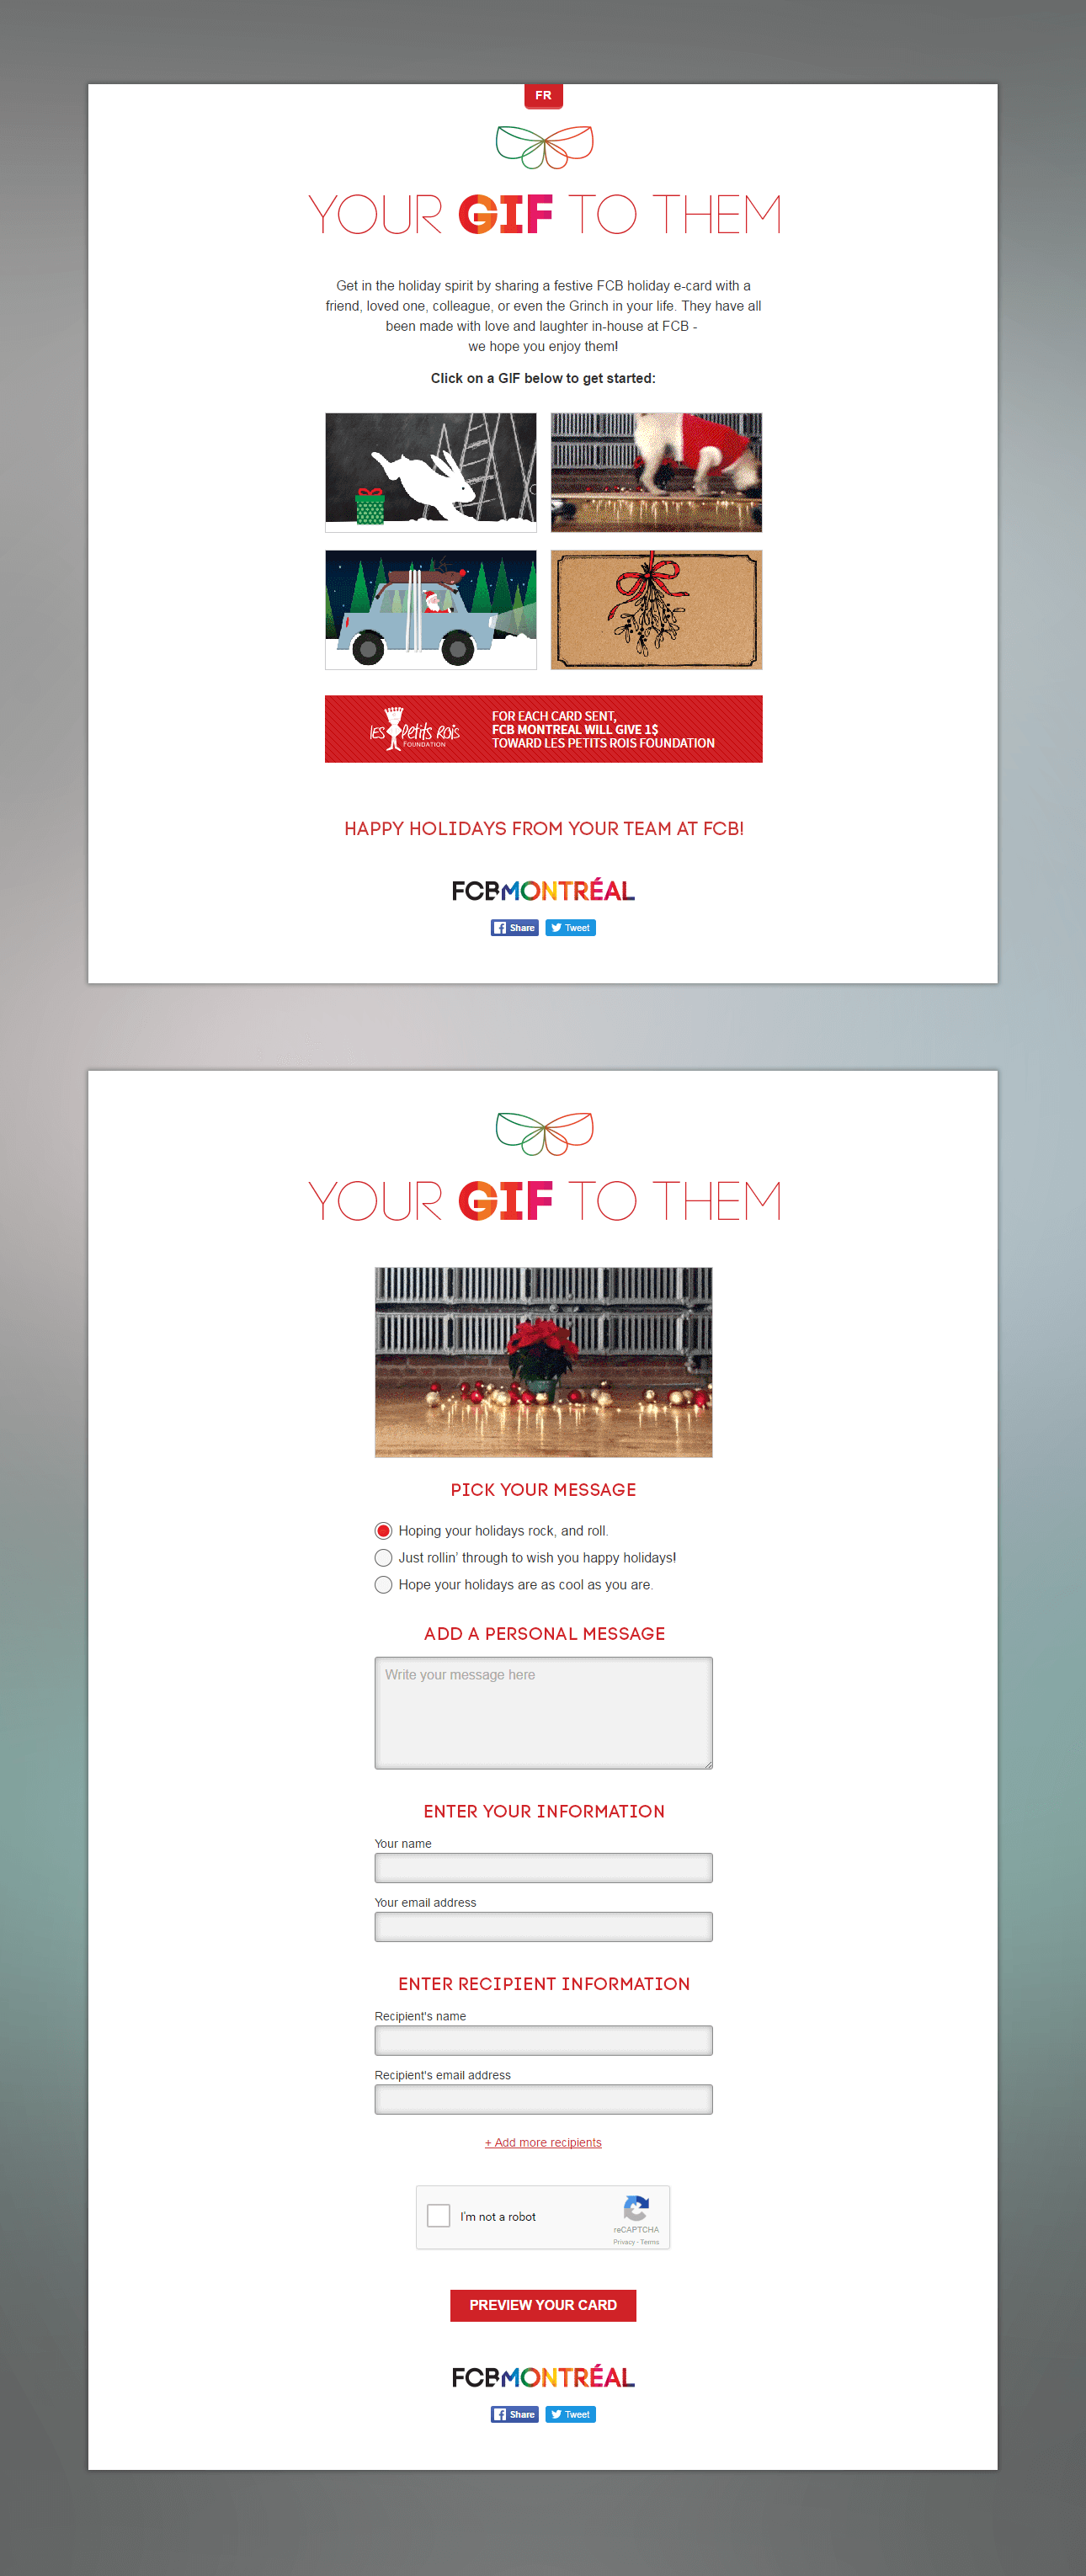 Screen captures of FCB's Your GIF to them Christmas Cards.